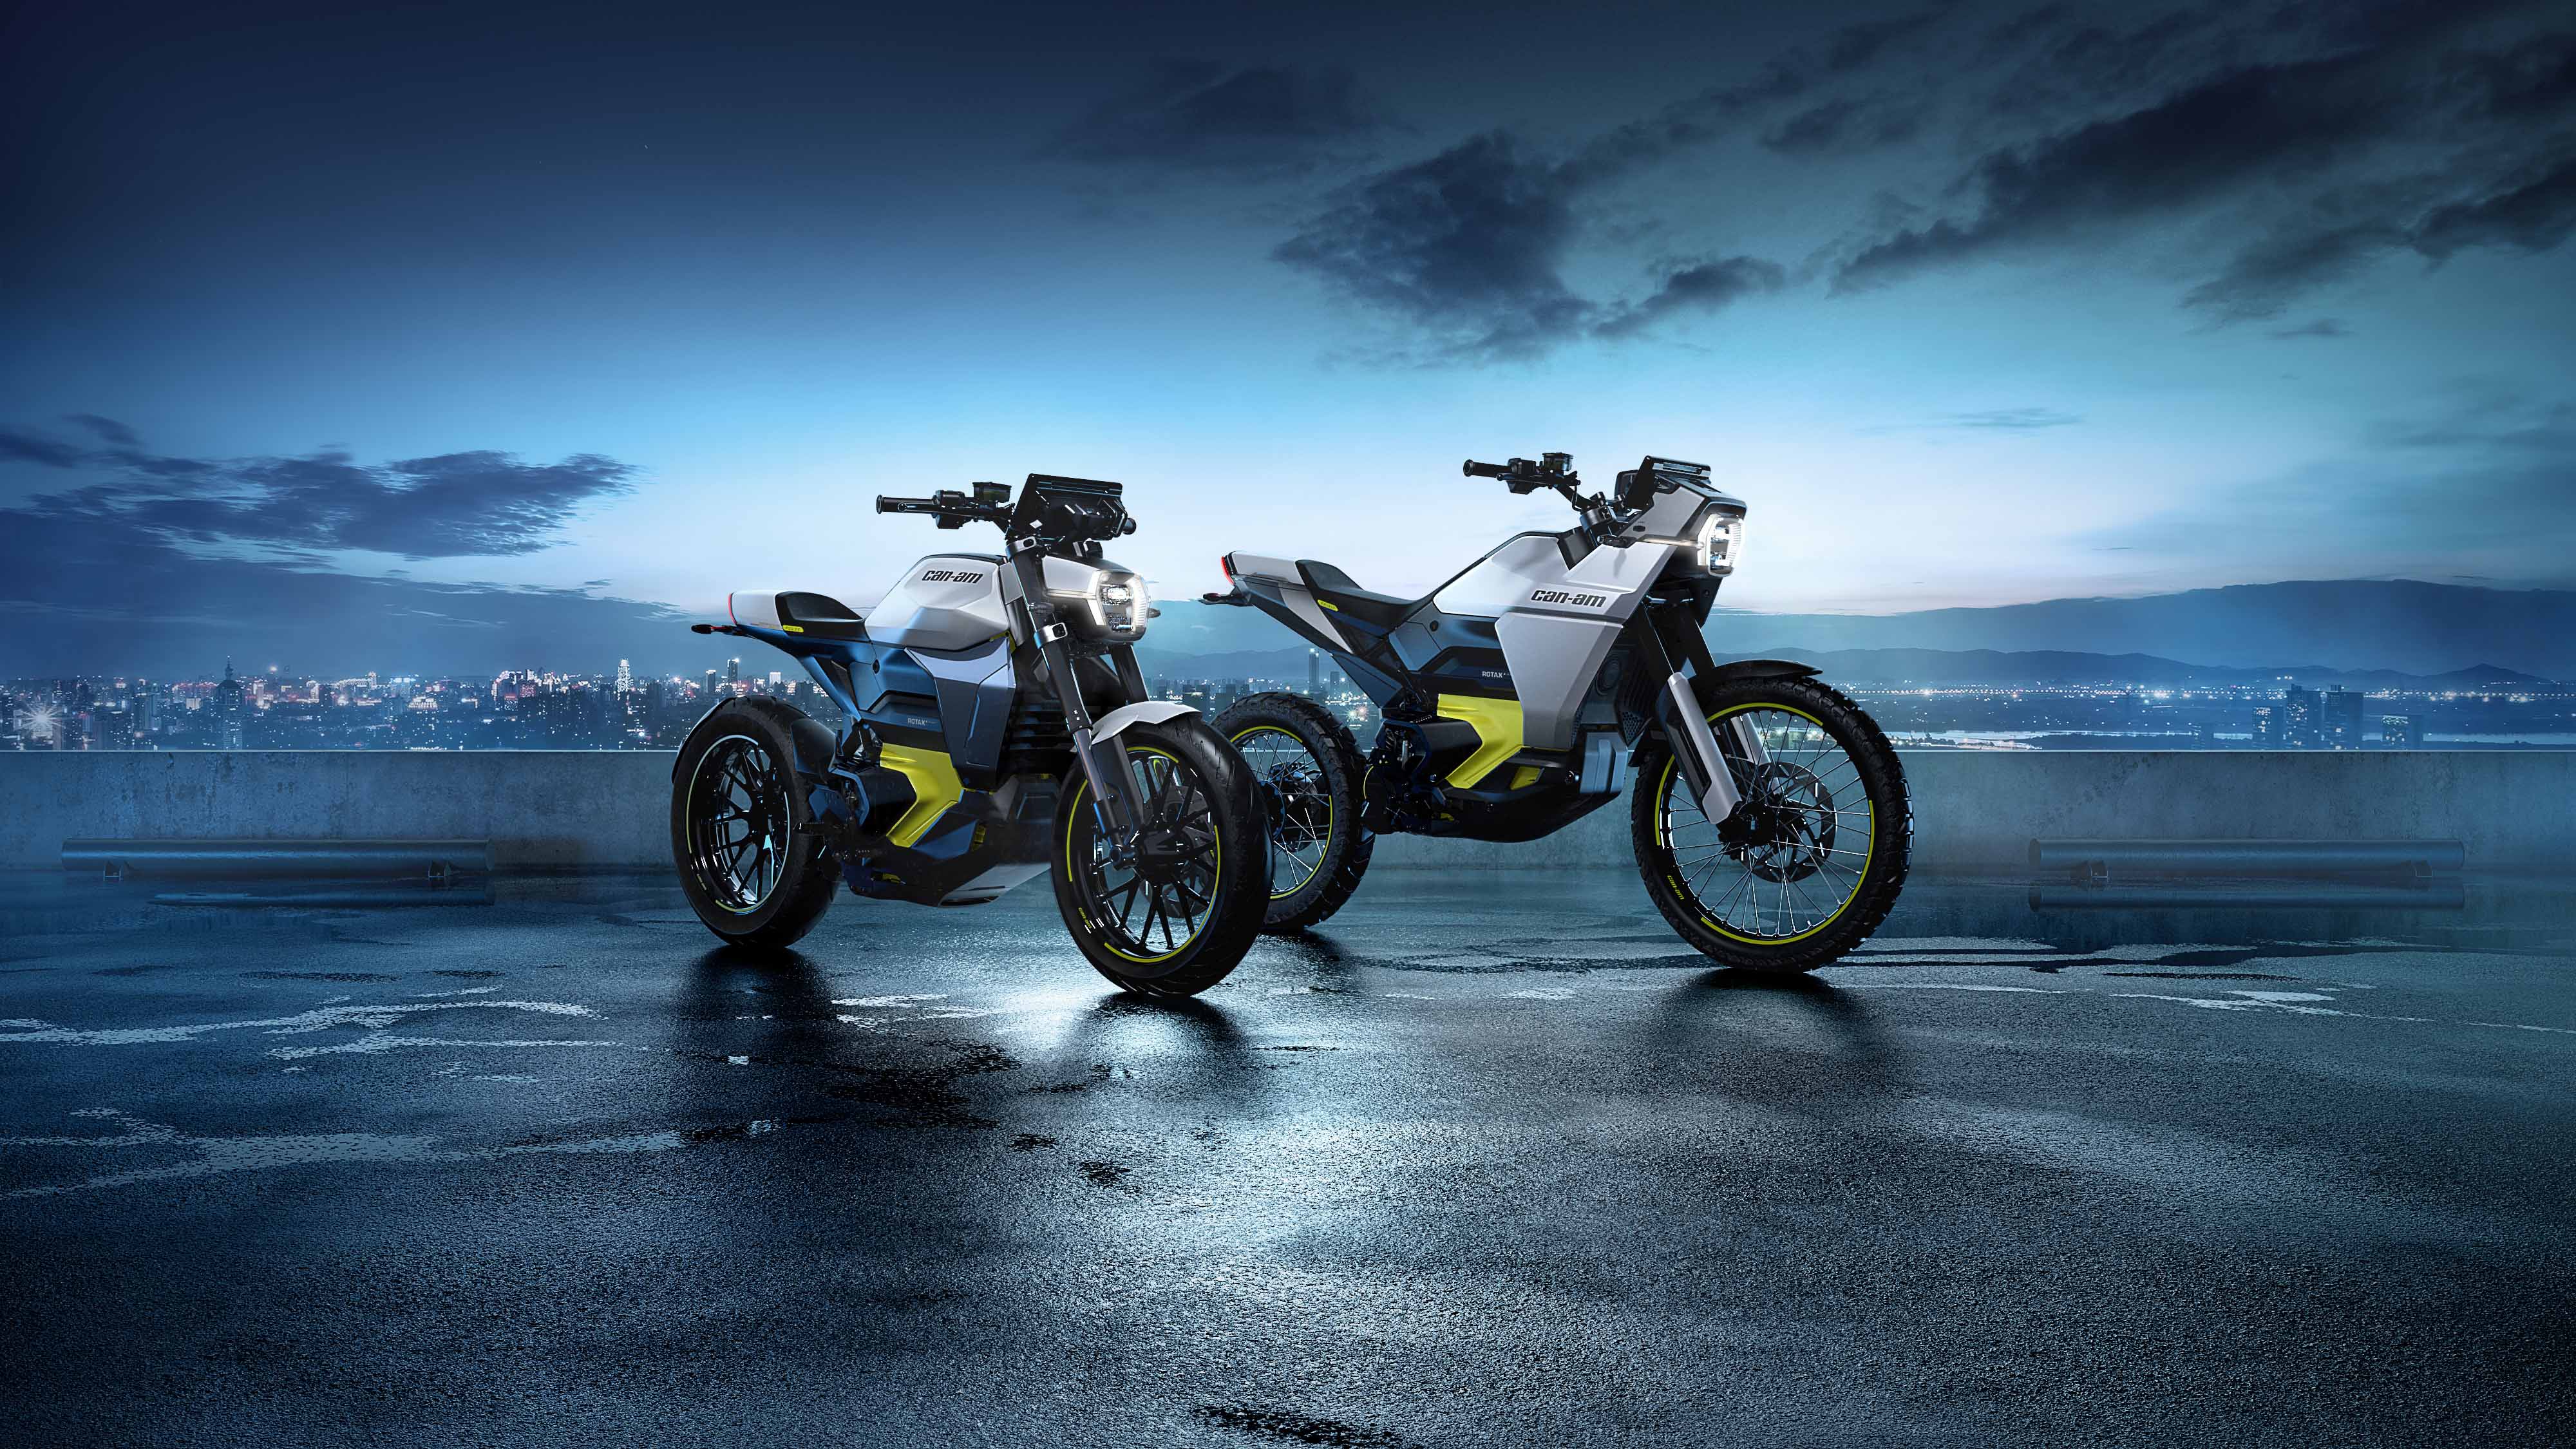 Can-Am motorcycles